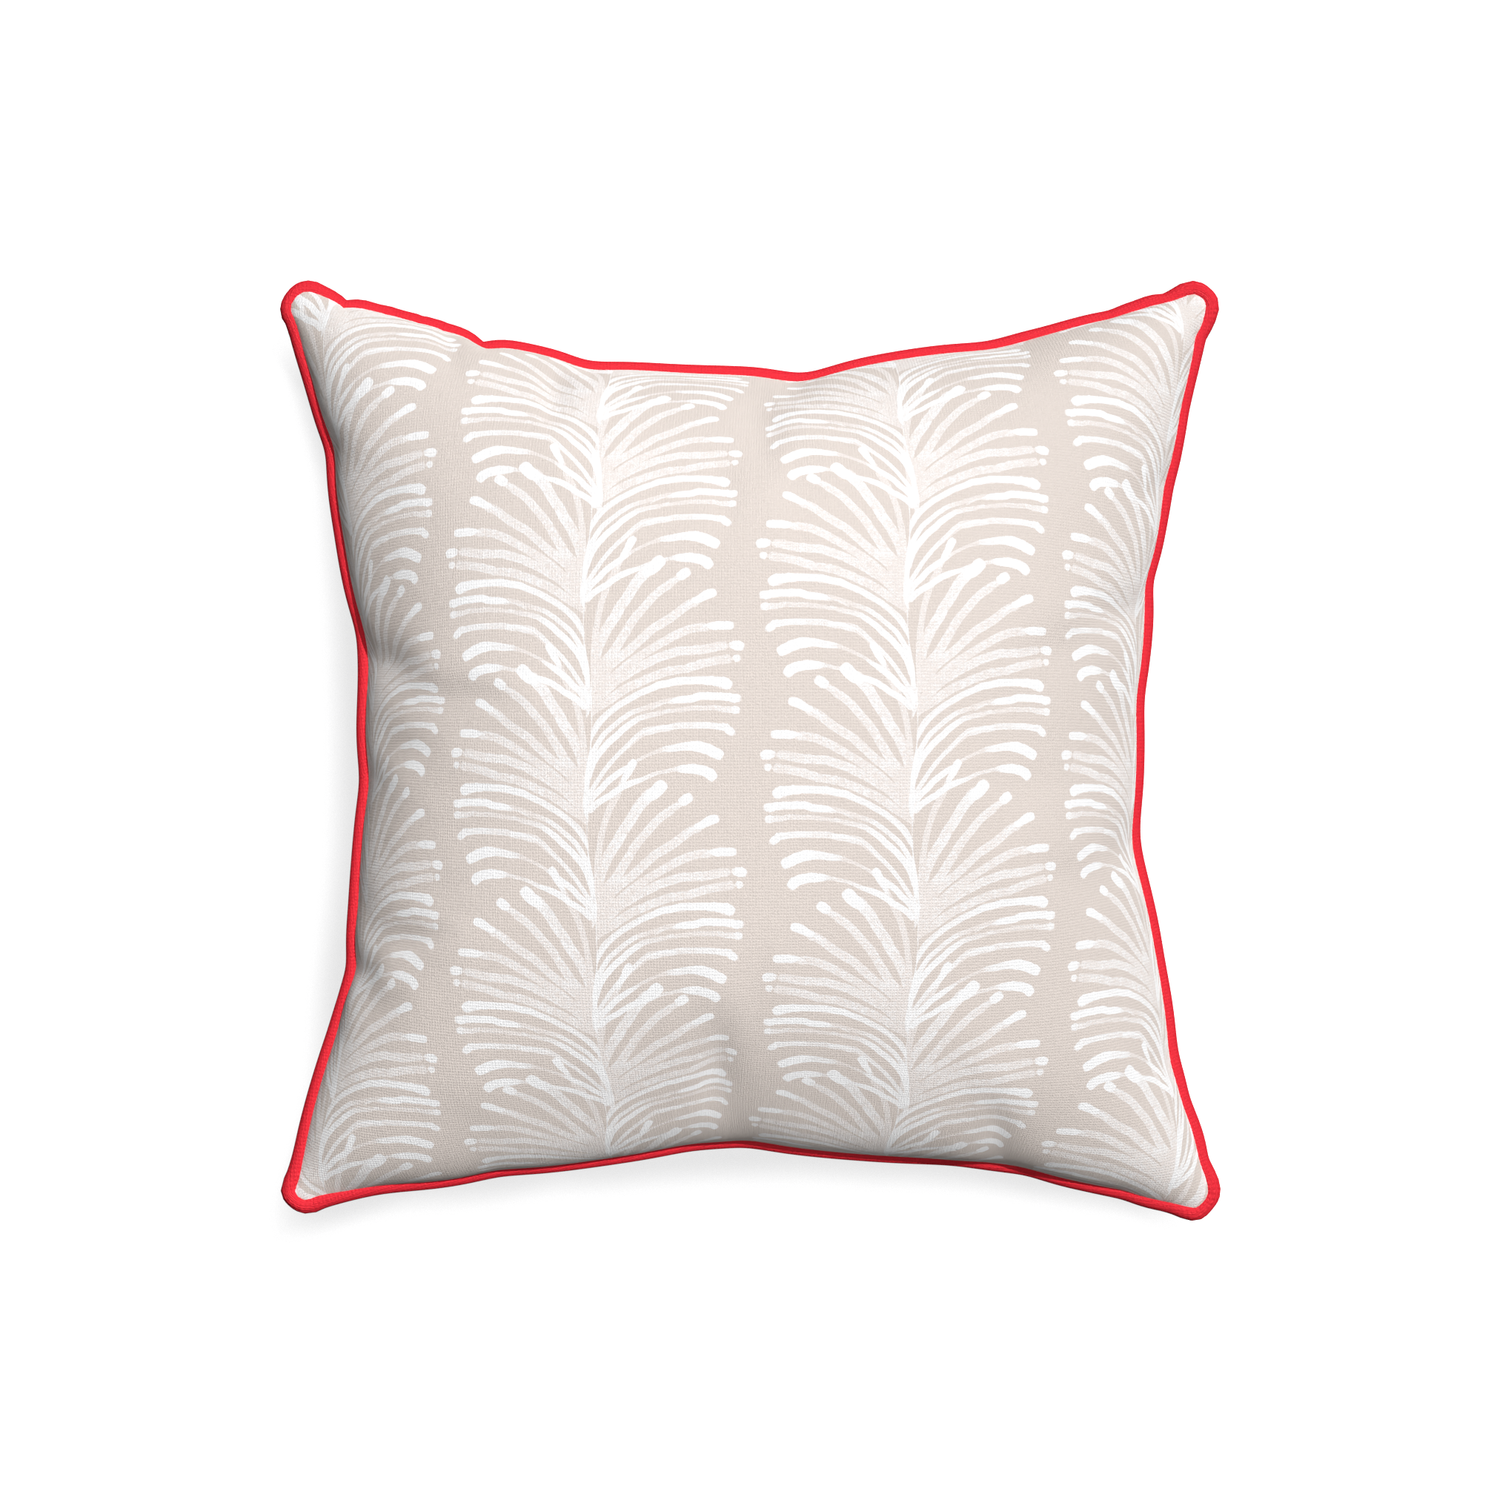 20-square emma sand custom sand colored botanical stripepillow with cherry piping on white background